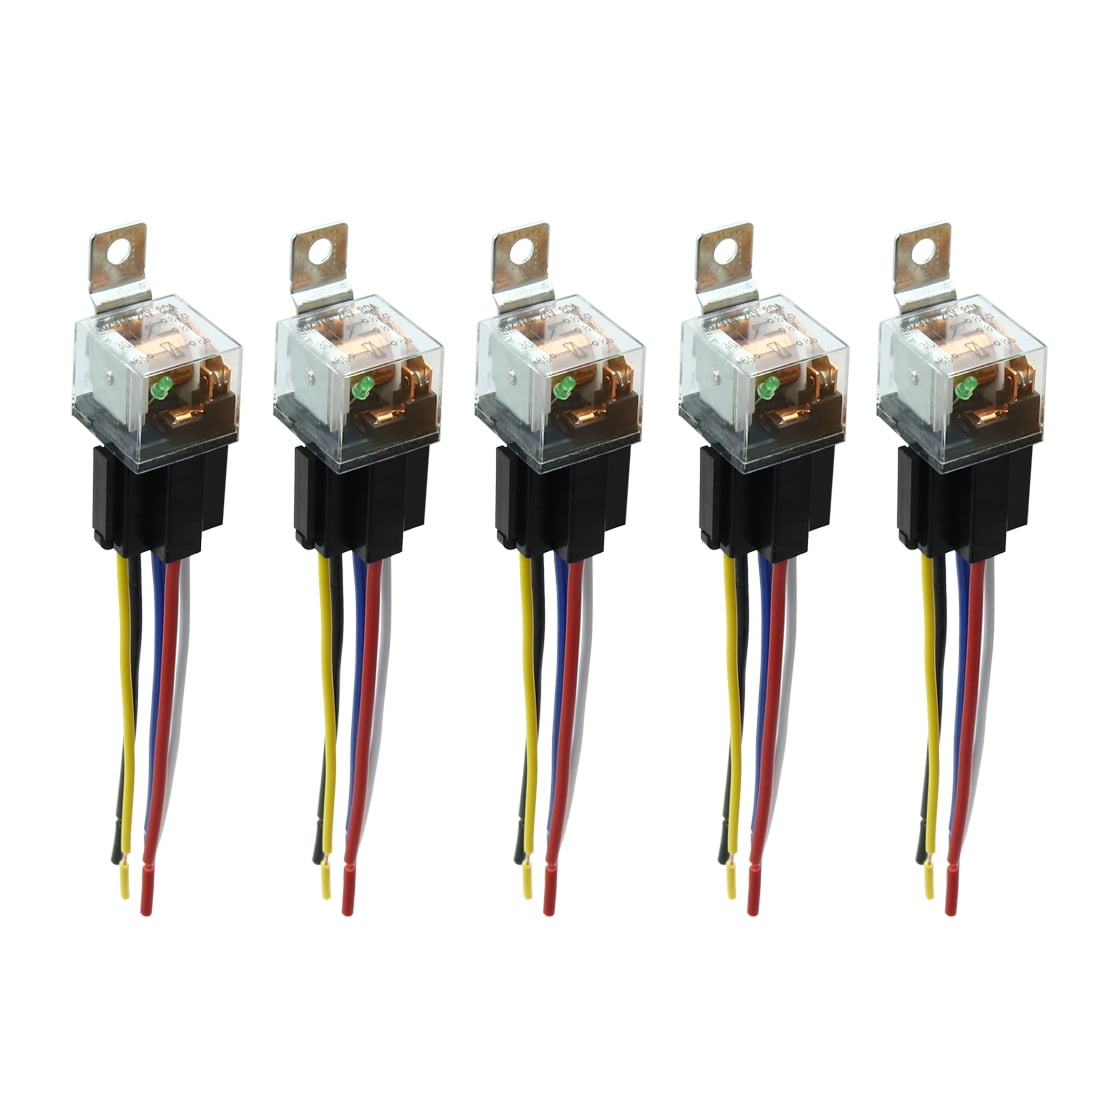 5 PCS Car Relay DC 24V 80A SPDT 5 Pin Car Switches Power Control ON/OFF USA Ship 